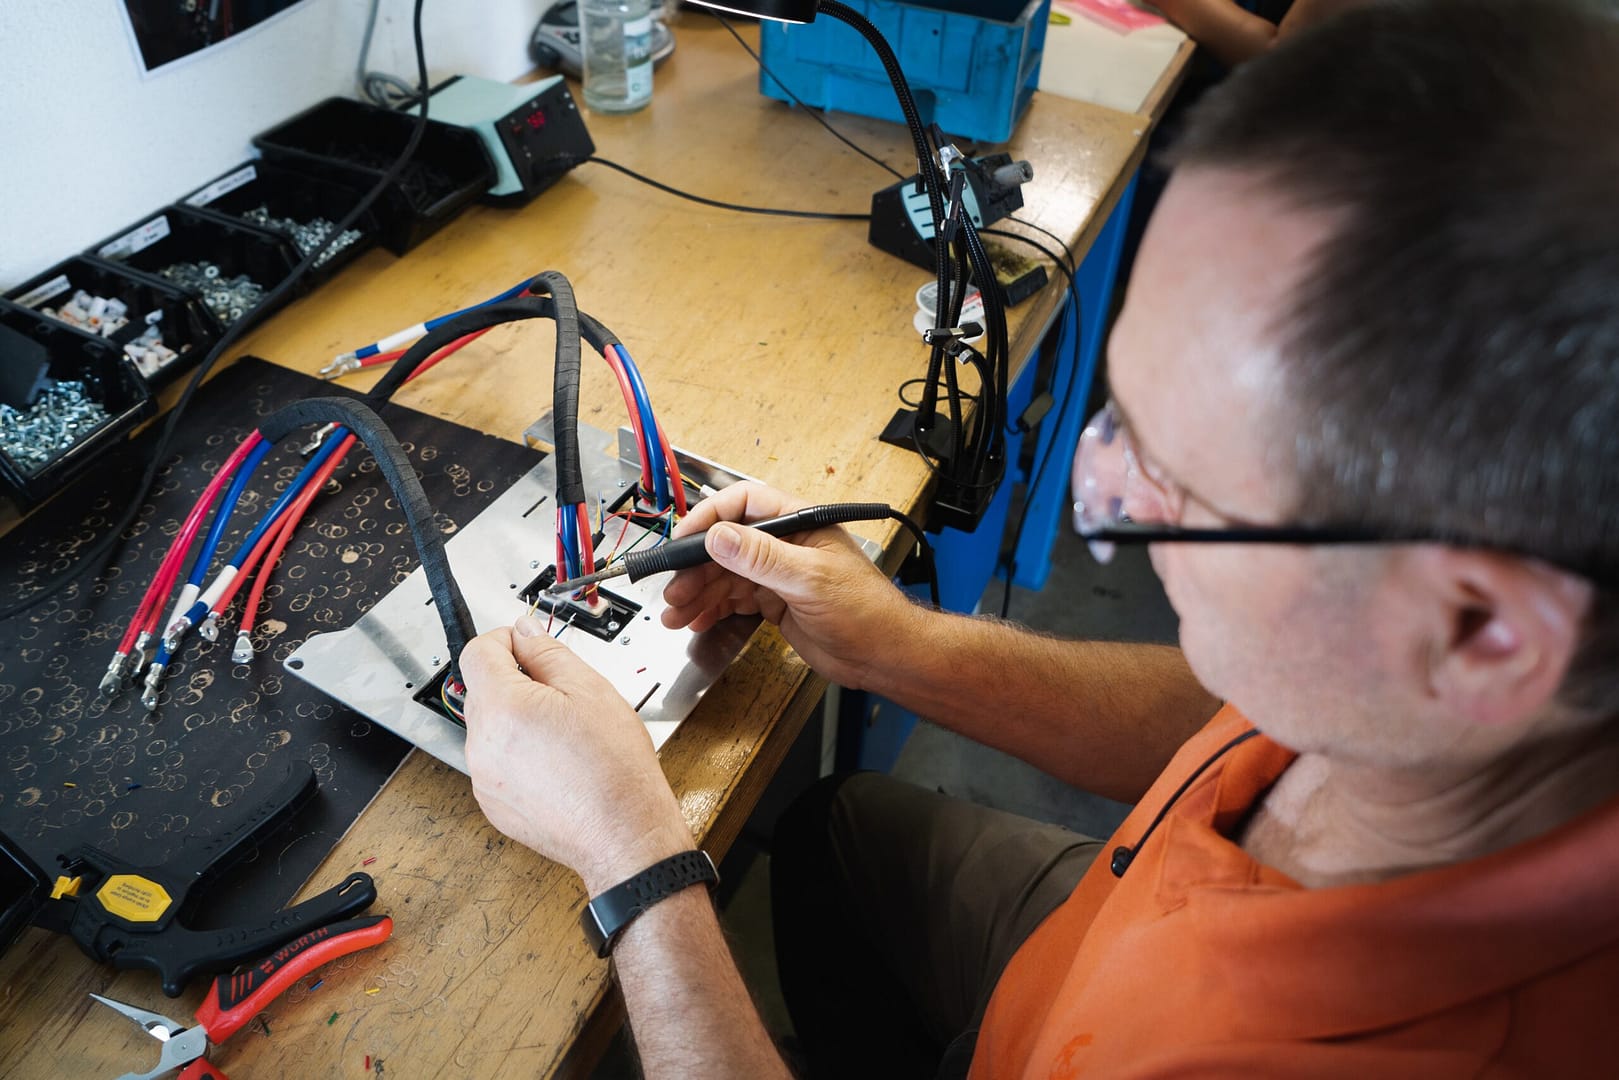 An electrical technician places wires in a board. More electricians every day are converting leads from LocalSplash because it represents a good investment with strong ROI in their electrician business.